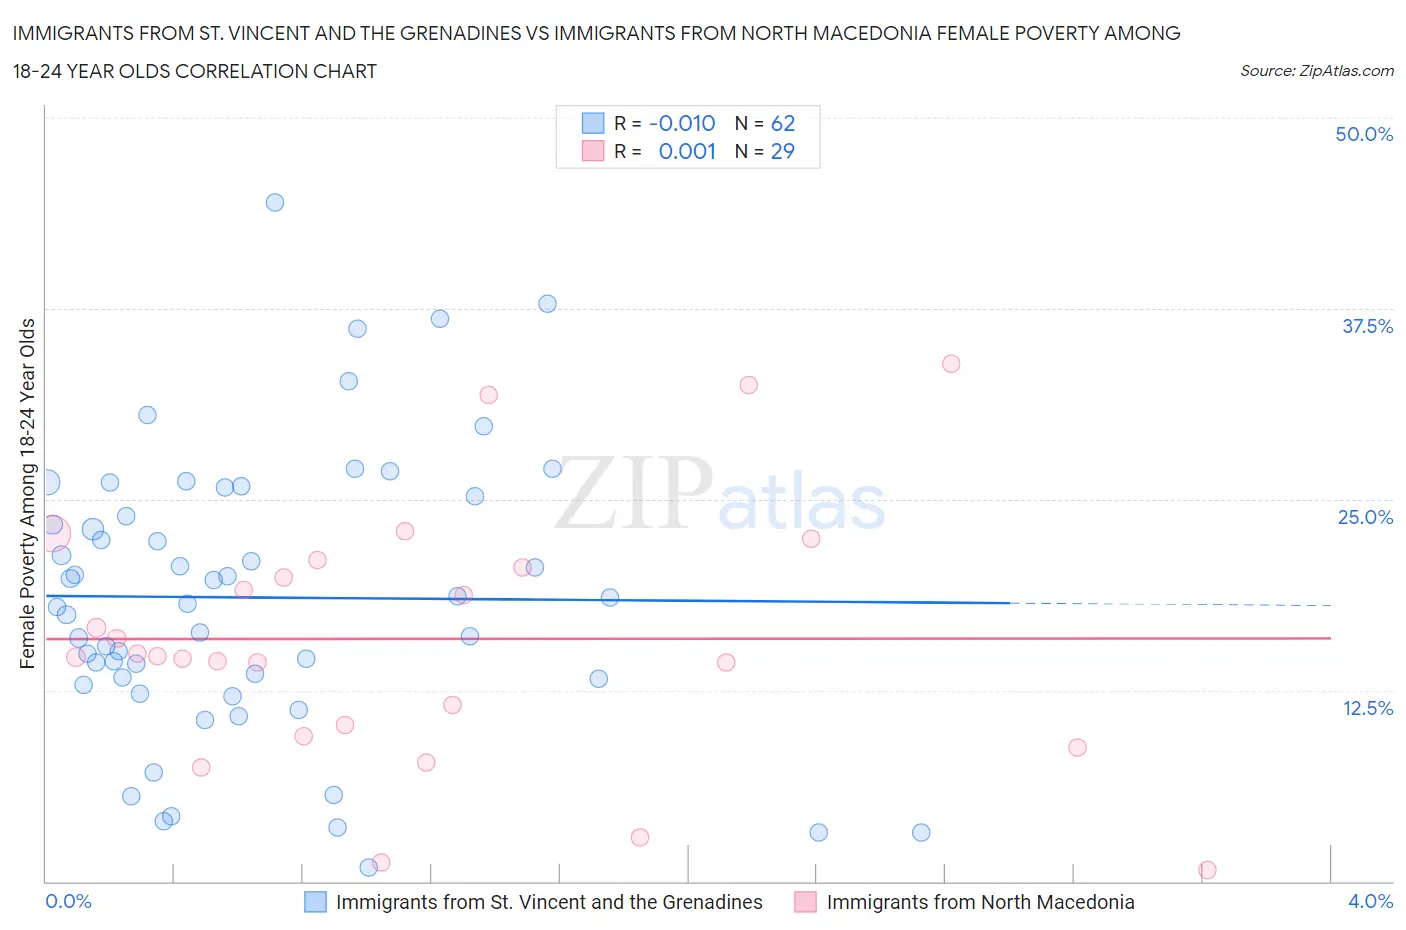 Immigrants from St. Vincent and the Grenadines vs Immigrants from North Macedonia Female Poverty Among 18-24 Year Olds